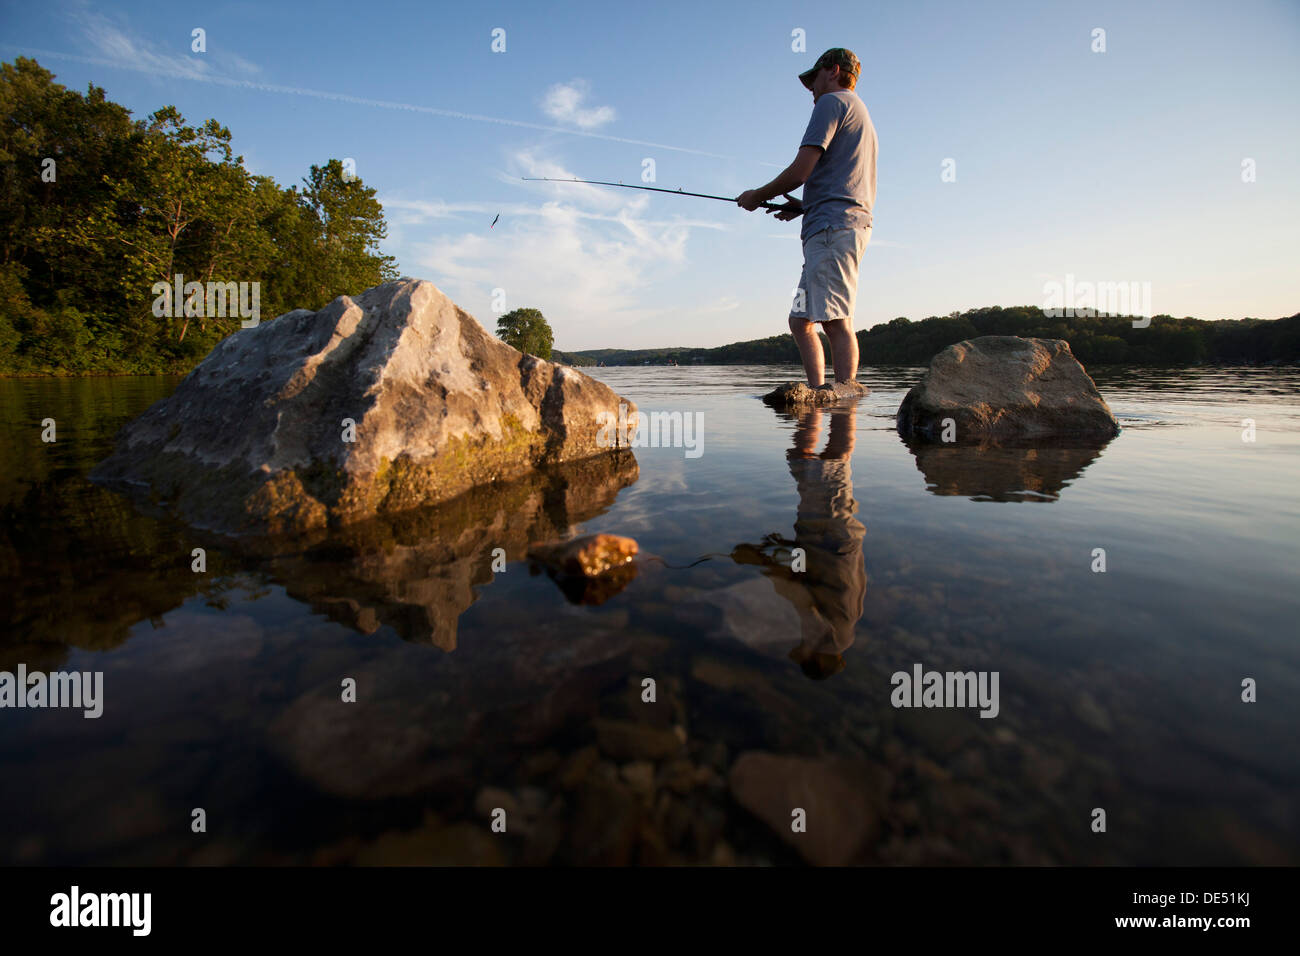 A man casts his line while fishing on Lake Windsor in Bella Vista, Arkansas. Stock Photo